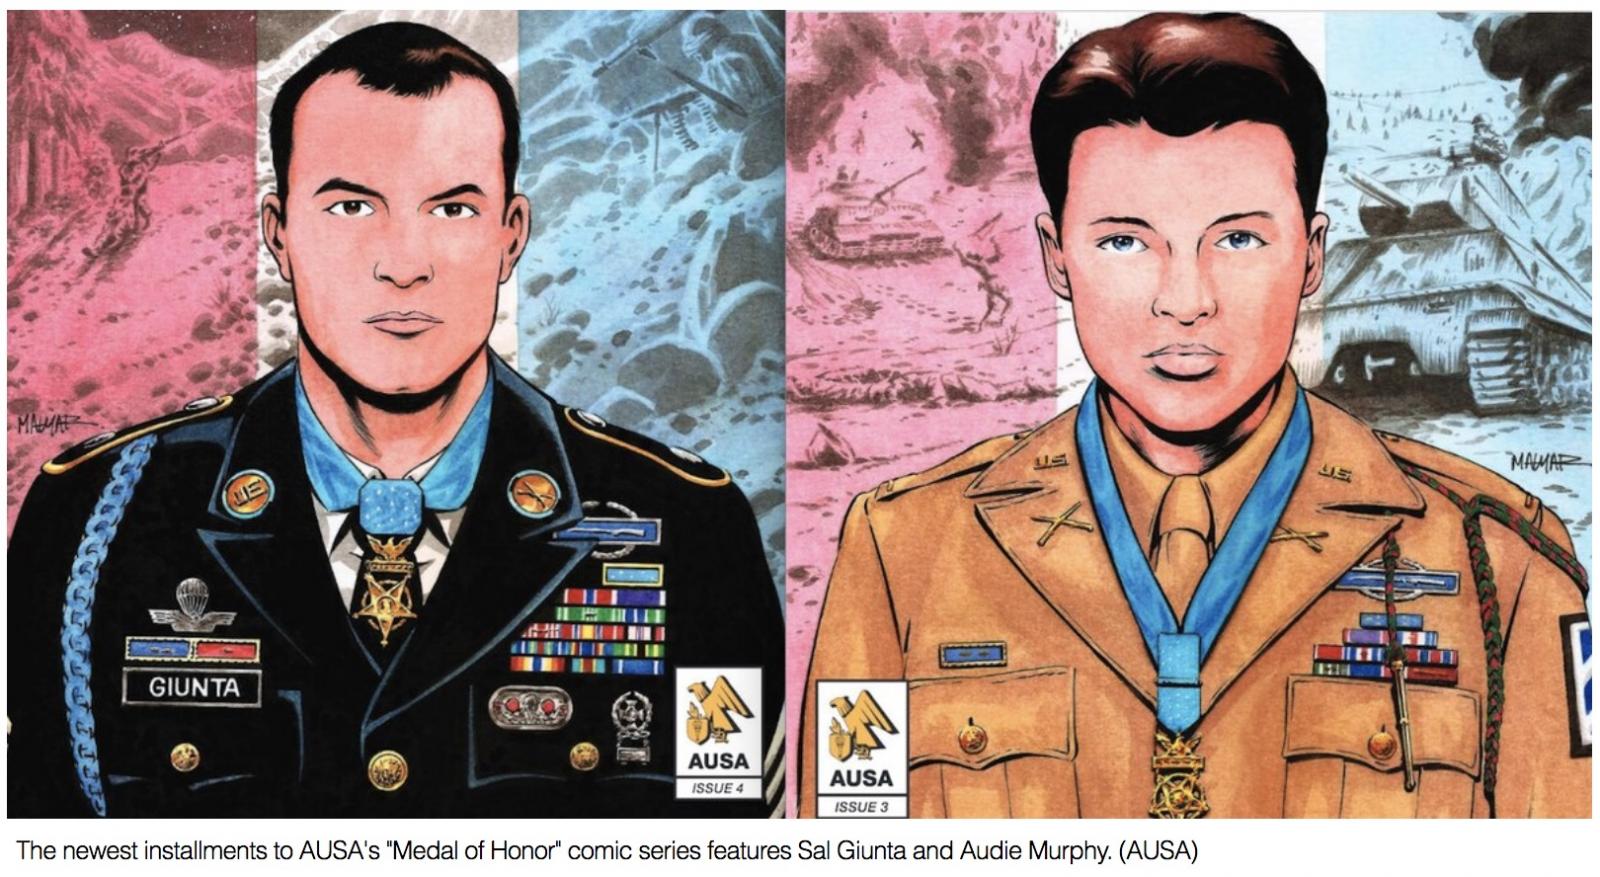  Medal of Honor comic series highlights actions of Audie Murphy and Sal Giunta